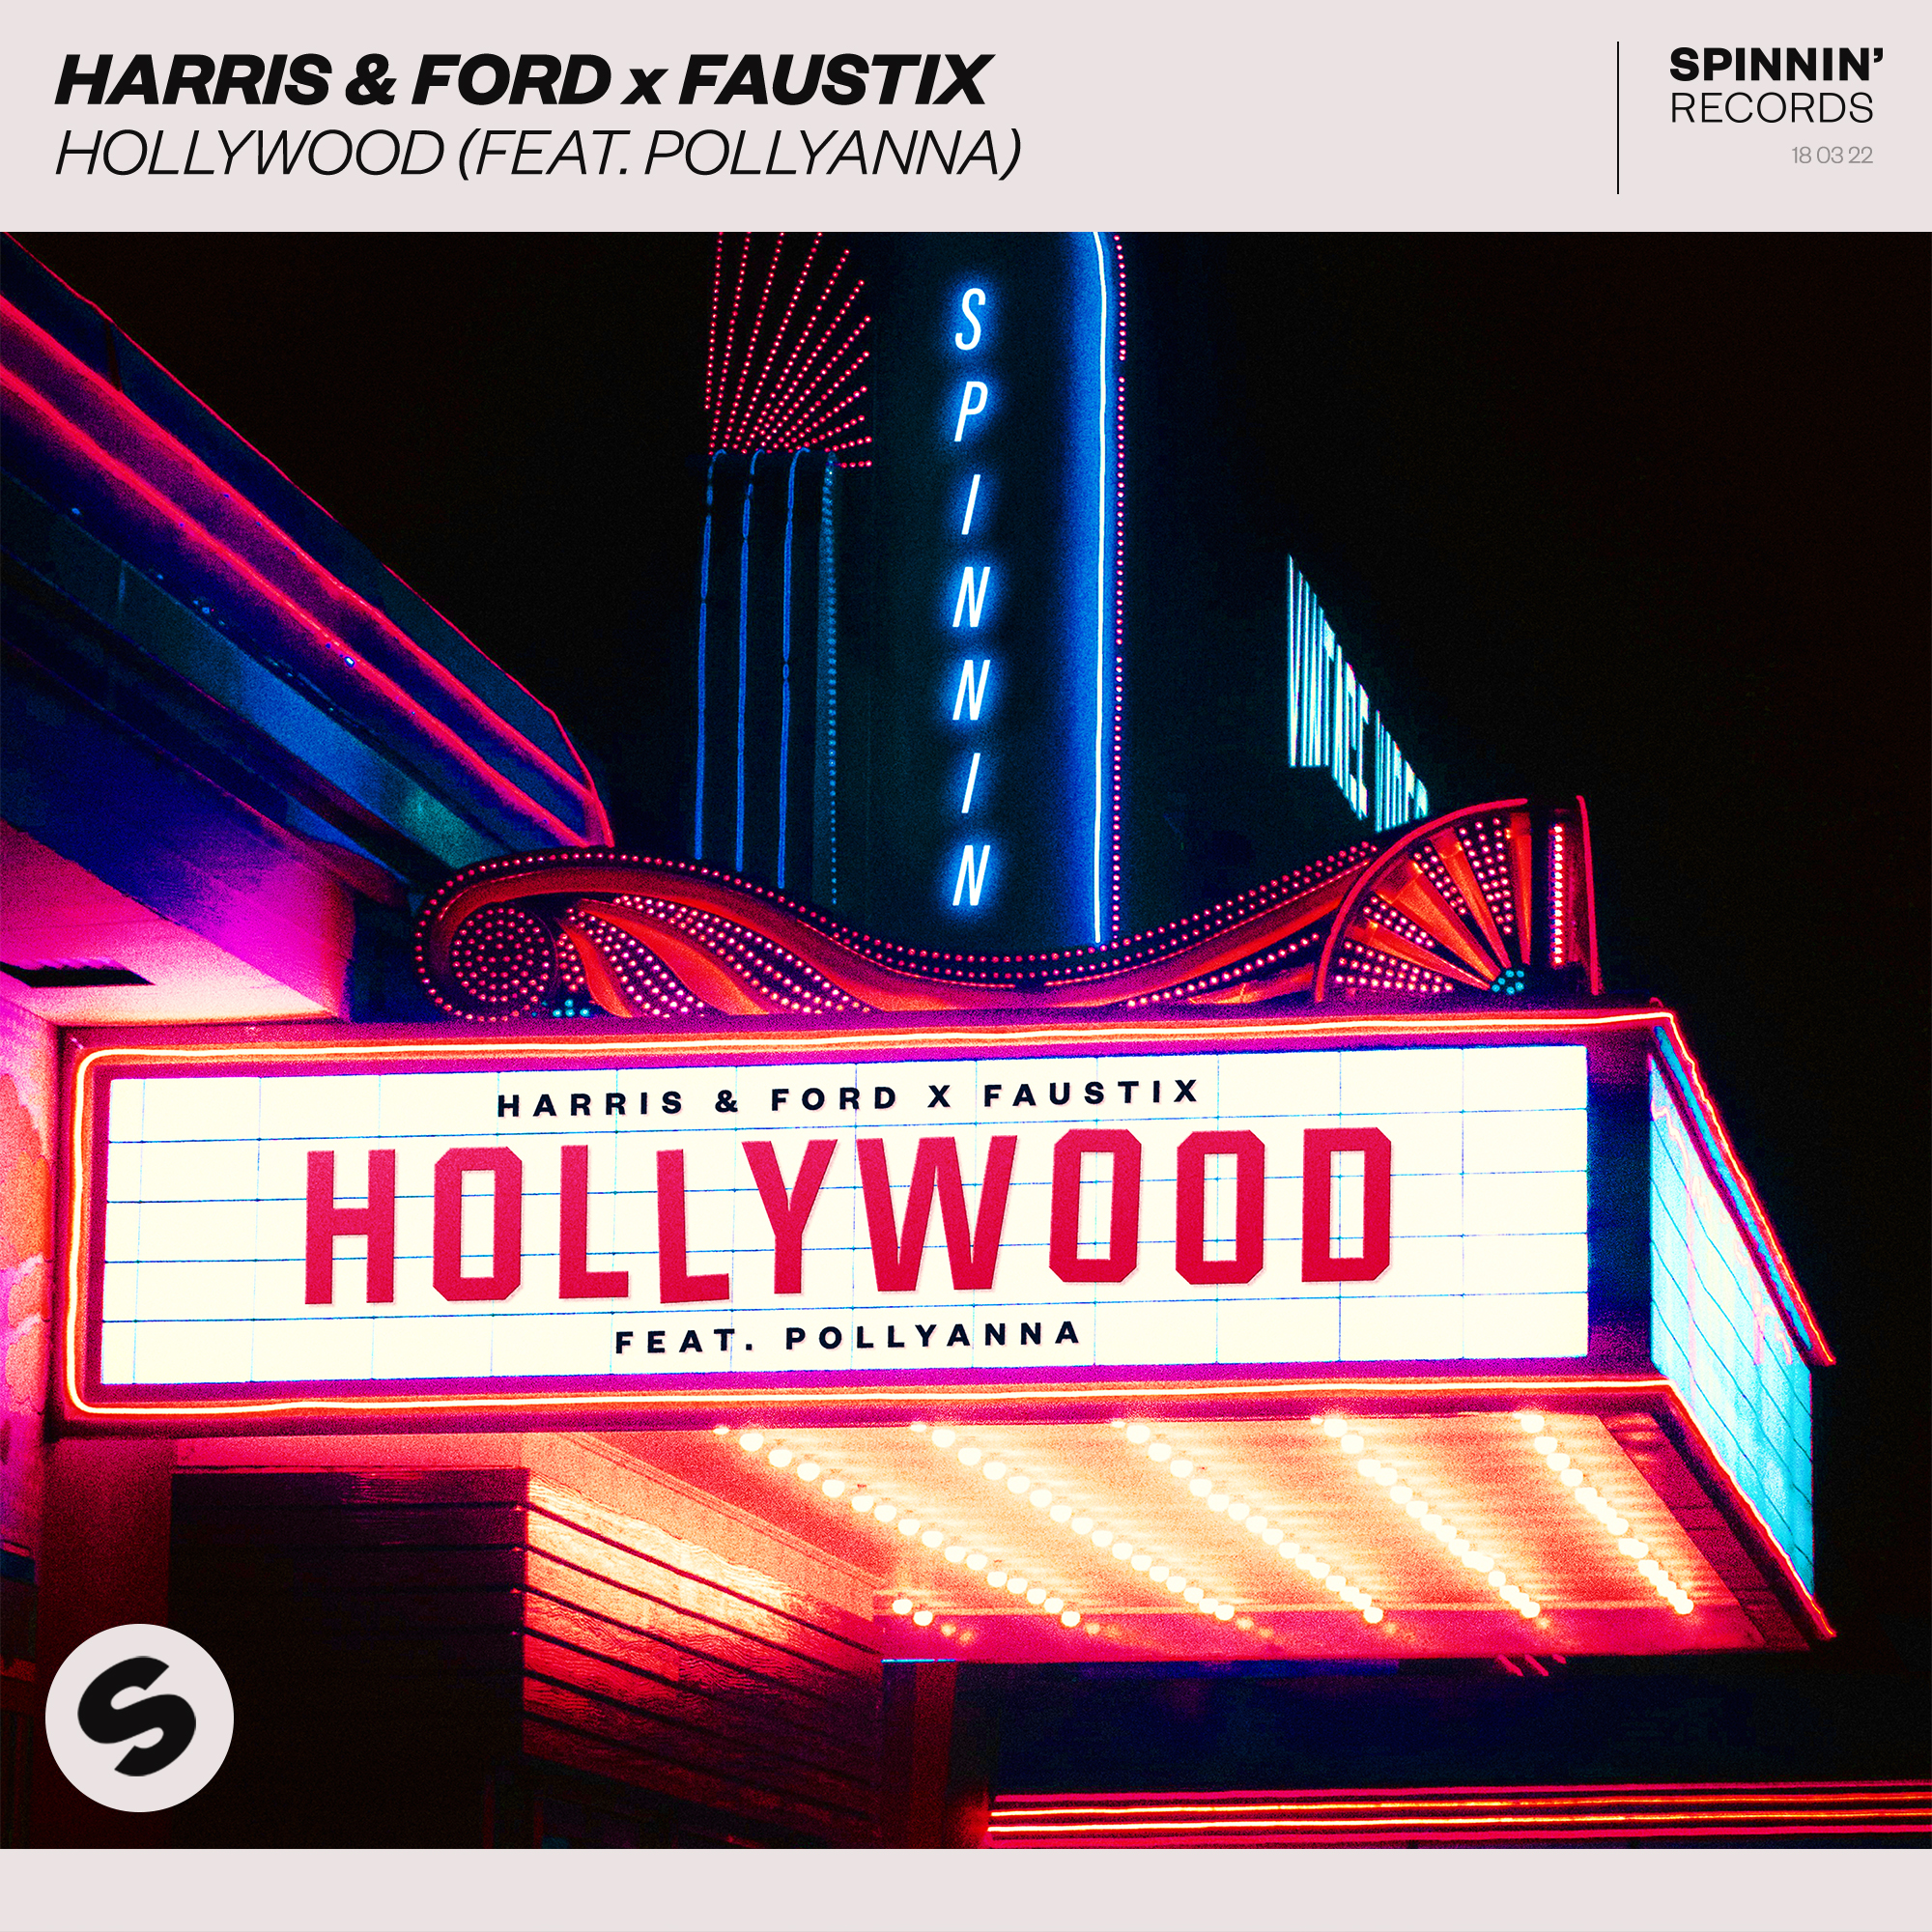 Harris &amp; Ford & Faustix ft. featuring PollyAnna Hollywood cover artwork